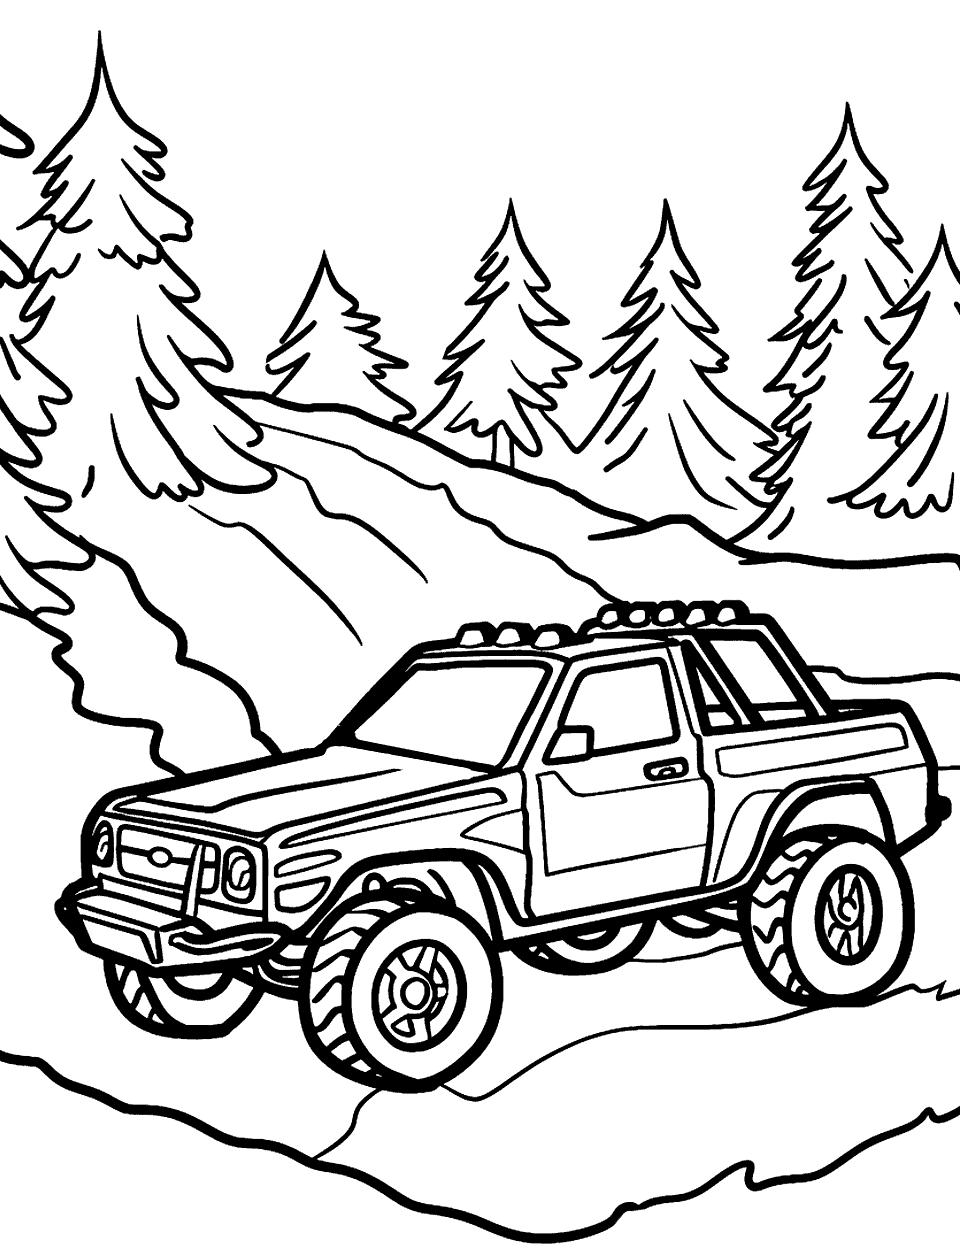 Mountain Trail Explorer Coloring Page - A Hot Wheels SUV on a mountainous trail, pine trees lining the path.